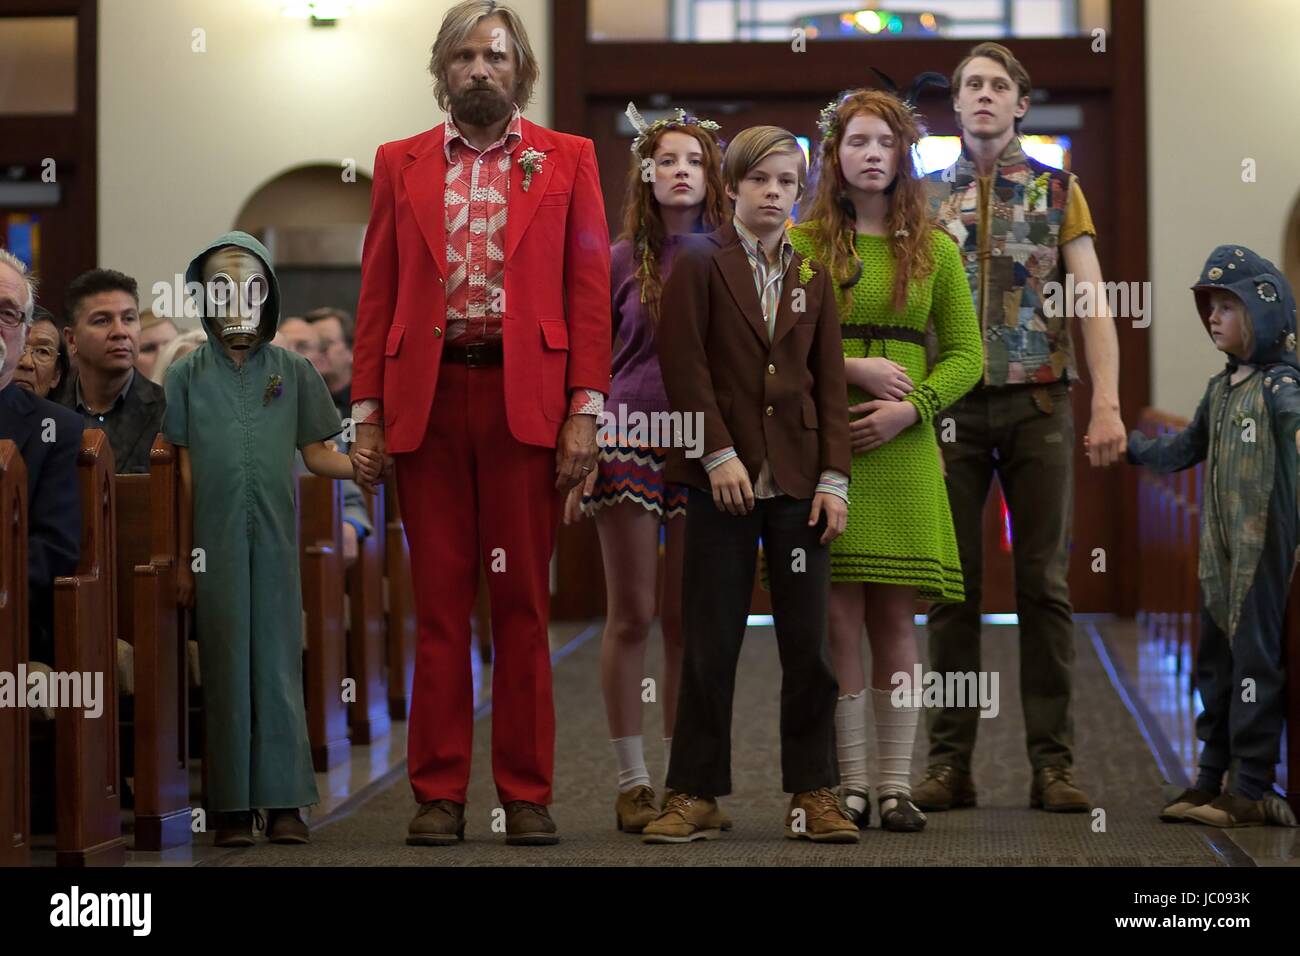 Captain Fantastic  Year : 2016 USA  Director : Matt Ross  Charlie Shotwell, Viggo Mortensen, Samantha Isler, Annalise Basso, Nicholas Hamilton, George MacKay, Shree Crooks Photo: Regan MacStravic.  It is forbidden to reproduce the photograph out of context of the promotion of the film. It must be credited to the Film Company and/or the photographer assigned by or authorized by/allowed on the set by the Film Company. Restricted to Editorial Use. Photo12 does not grant publicity rights of the persons represented. Stock Photo